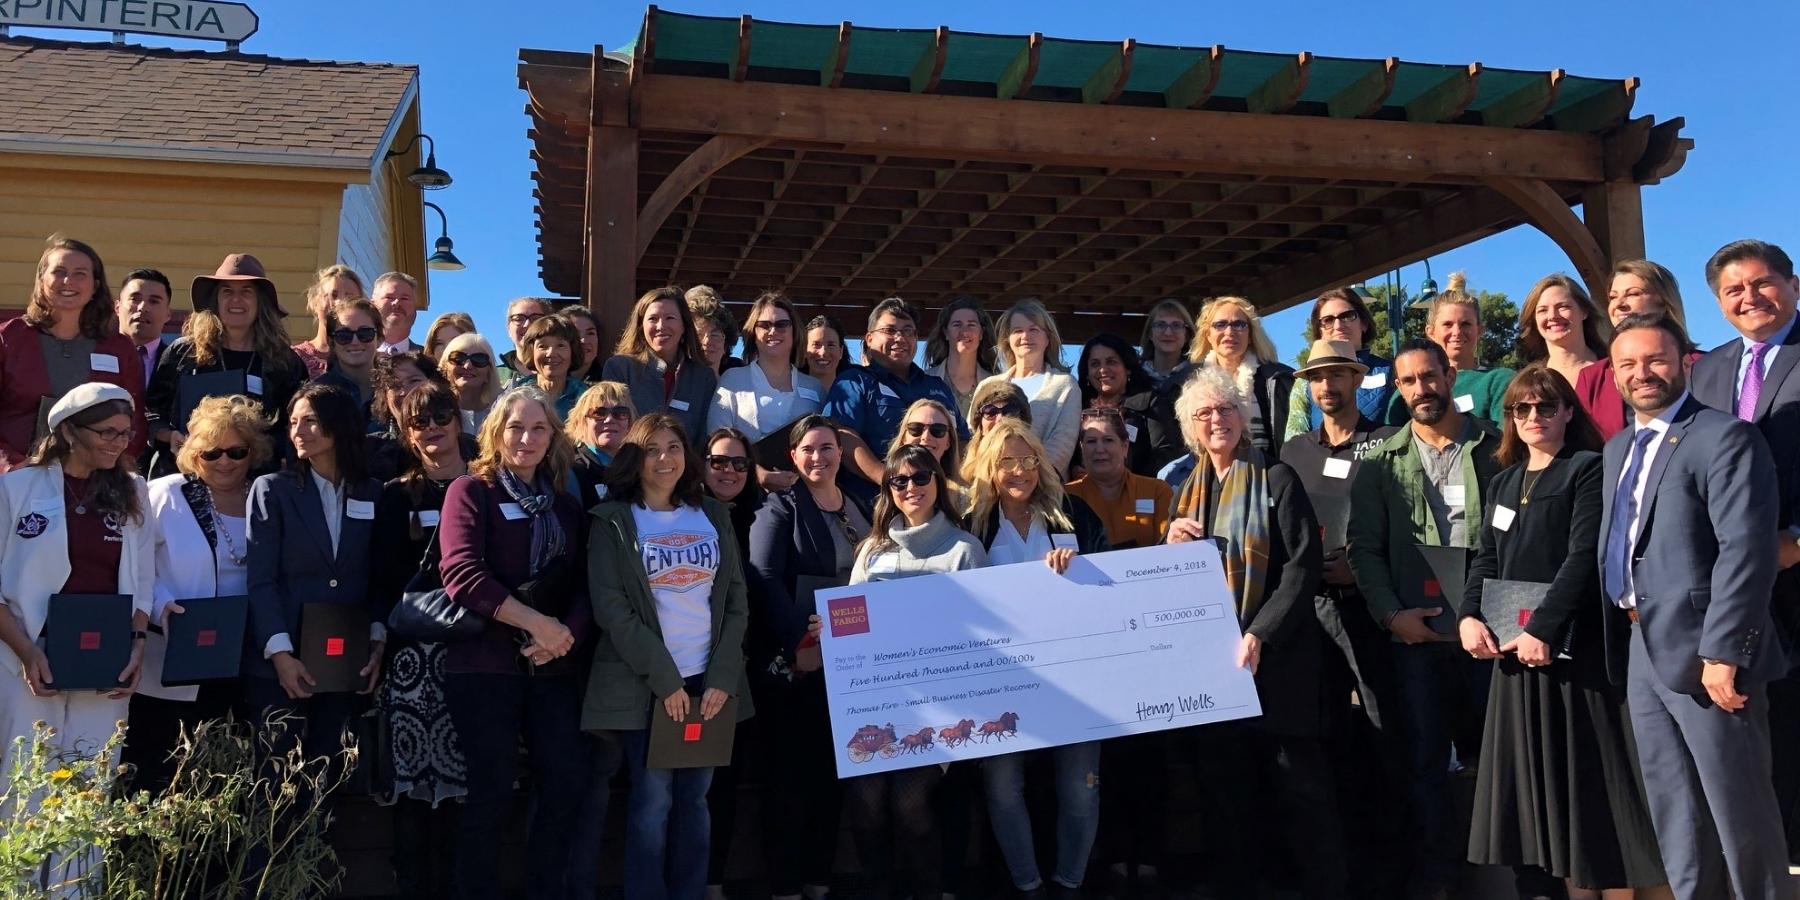 Business owners impacted by the Thomas Fire & Montecito Debris flow receive Business Recovery Grants.